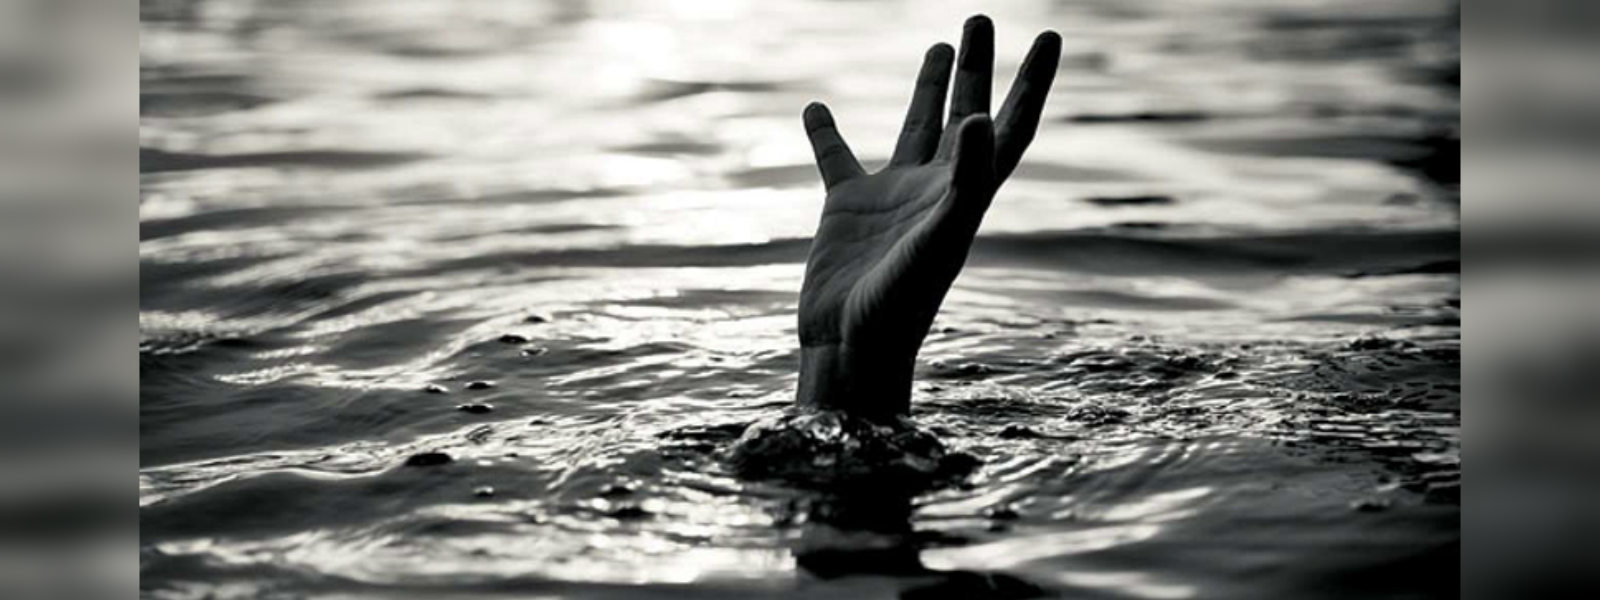 French national drowns in the Moragolla sea 